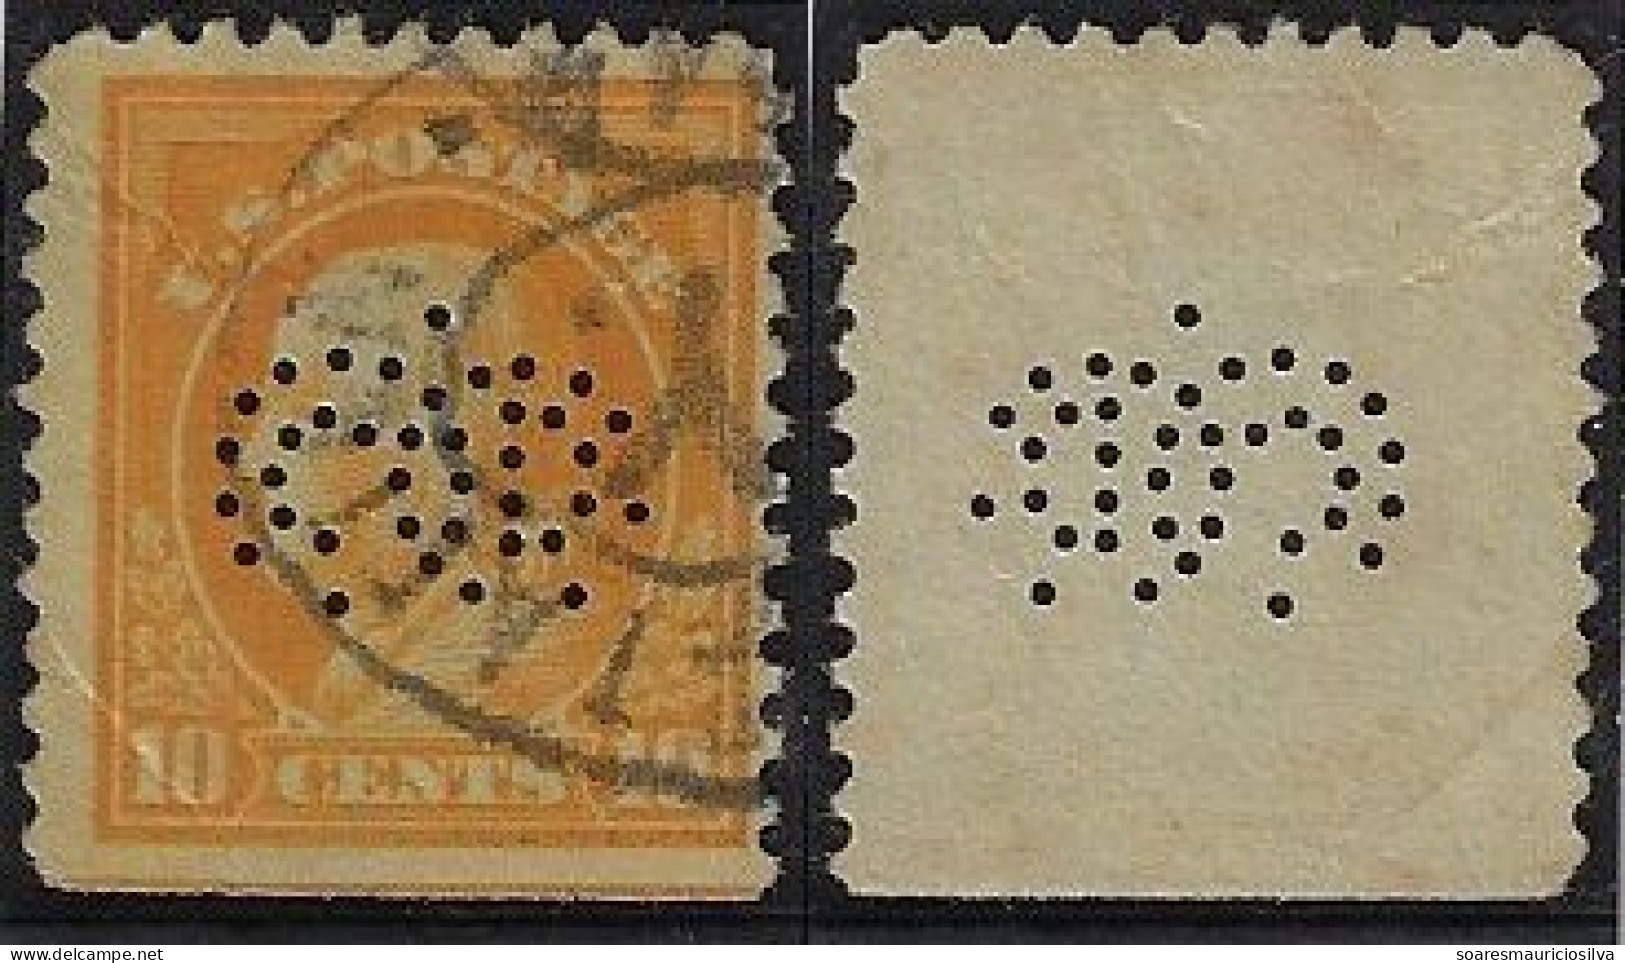 USA United States 1908/1917 Stamp With Perfin CD (circles) By Consolidated Dental Manufacturing Company Lochung Perfore - Perfins